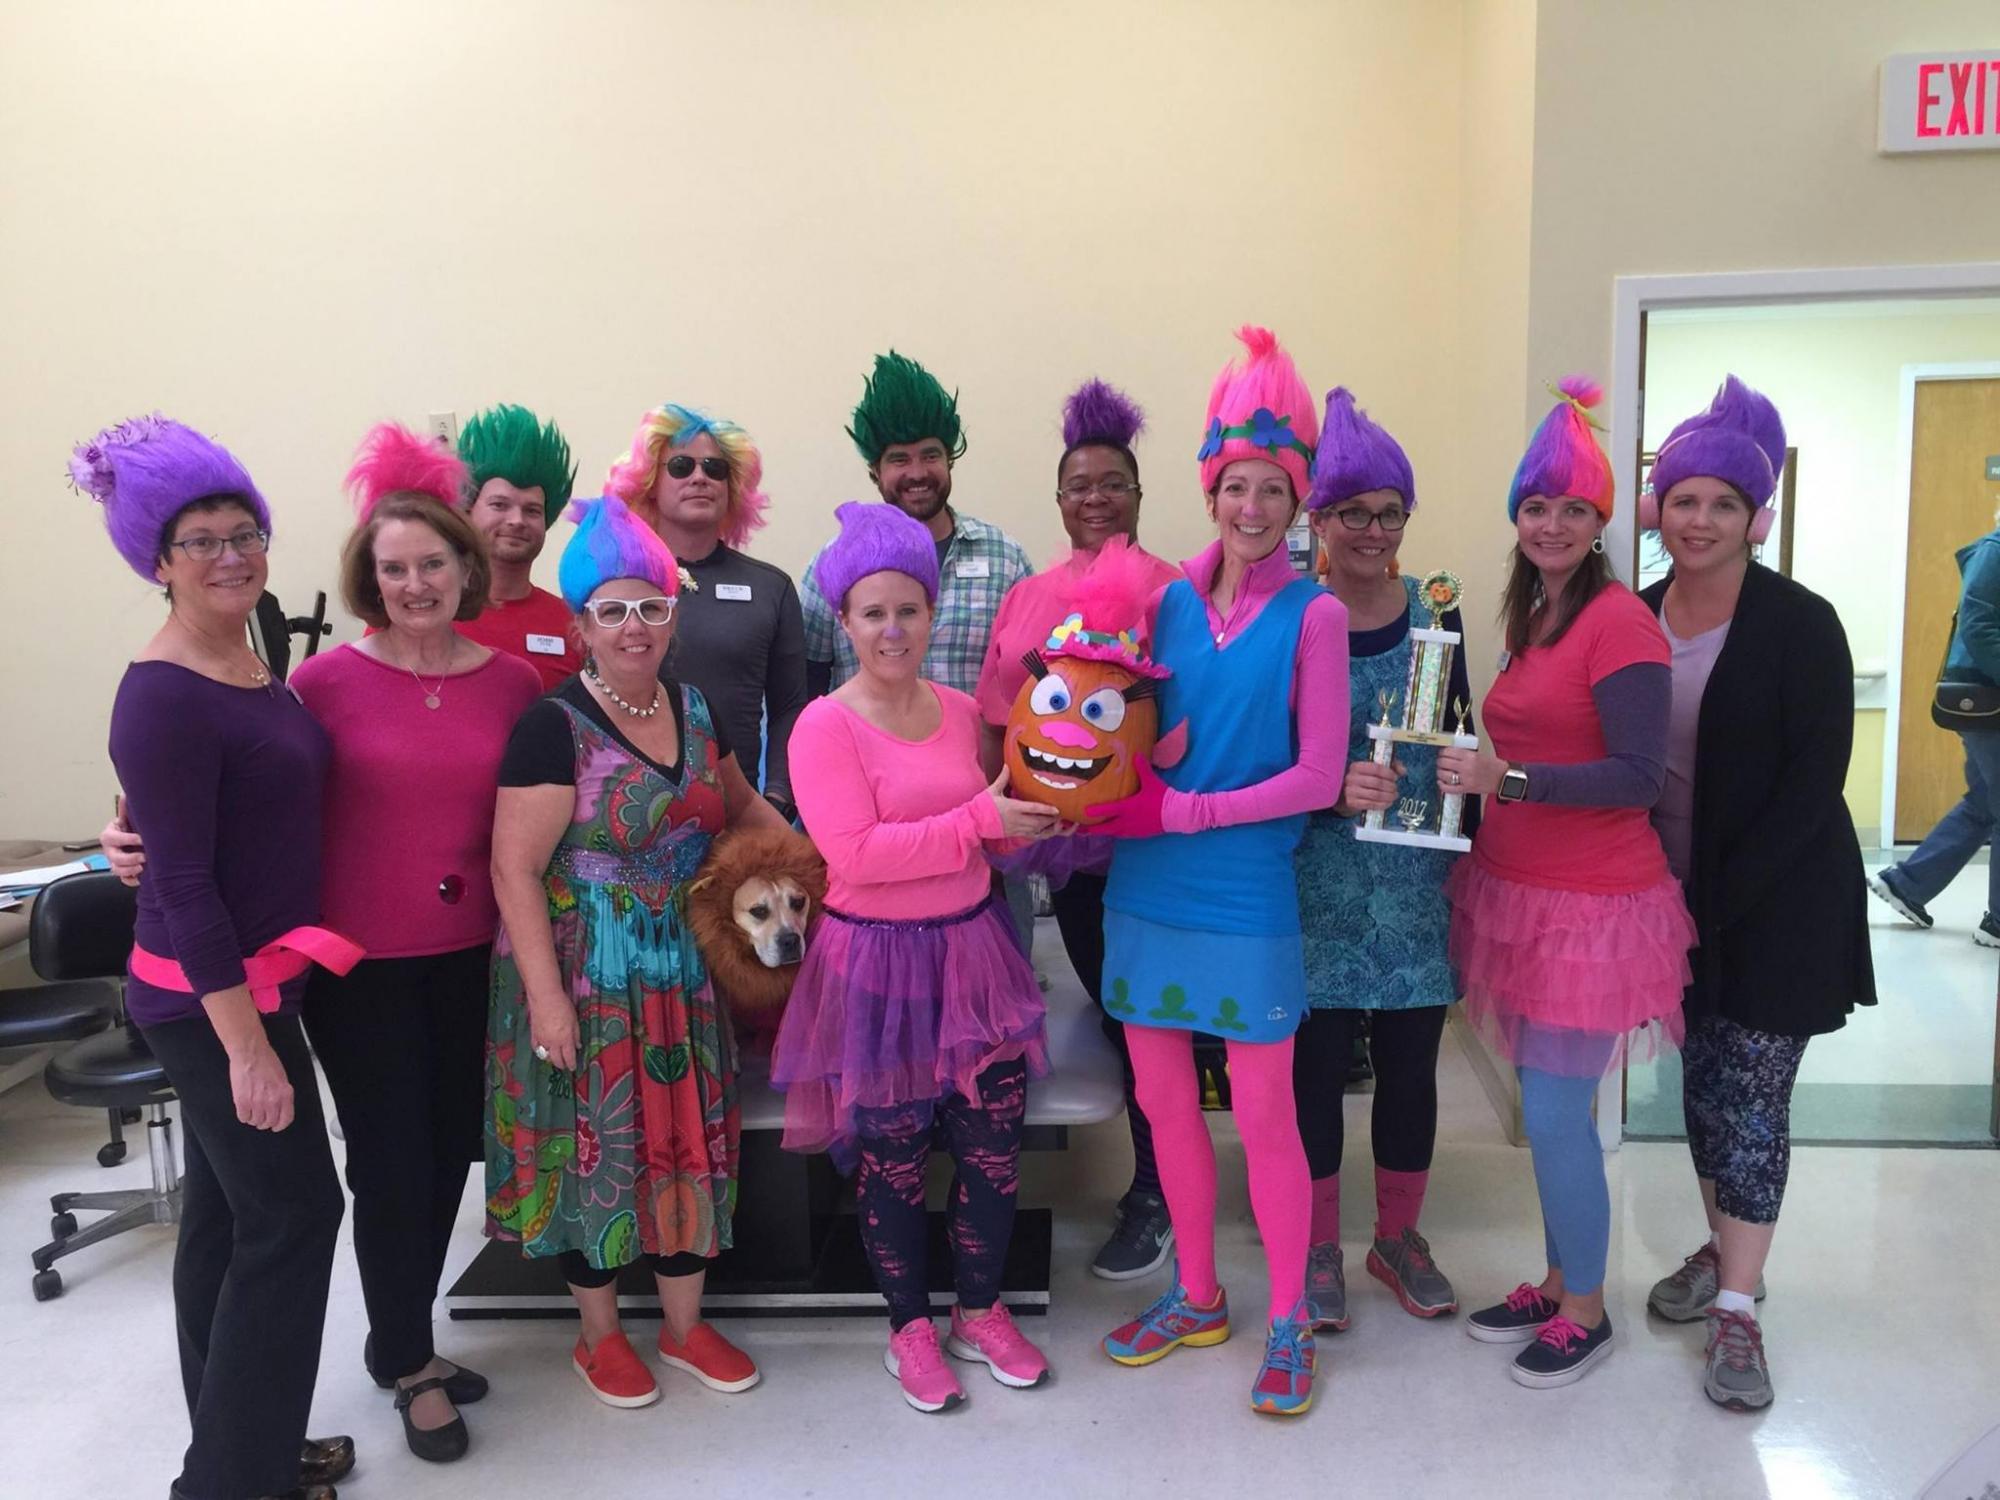 Beaufont team dressed up as Trolls for Halloween 2017